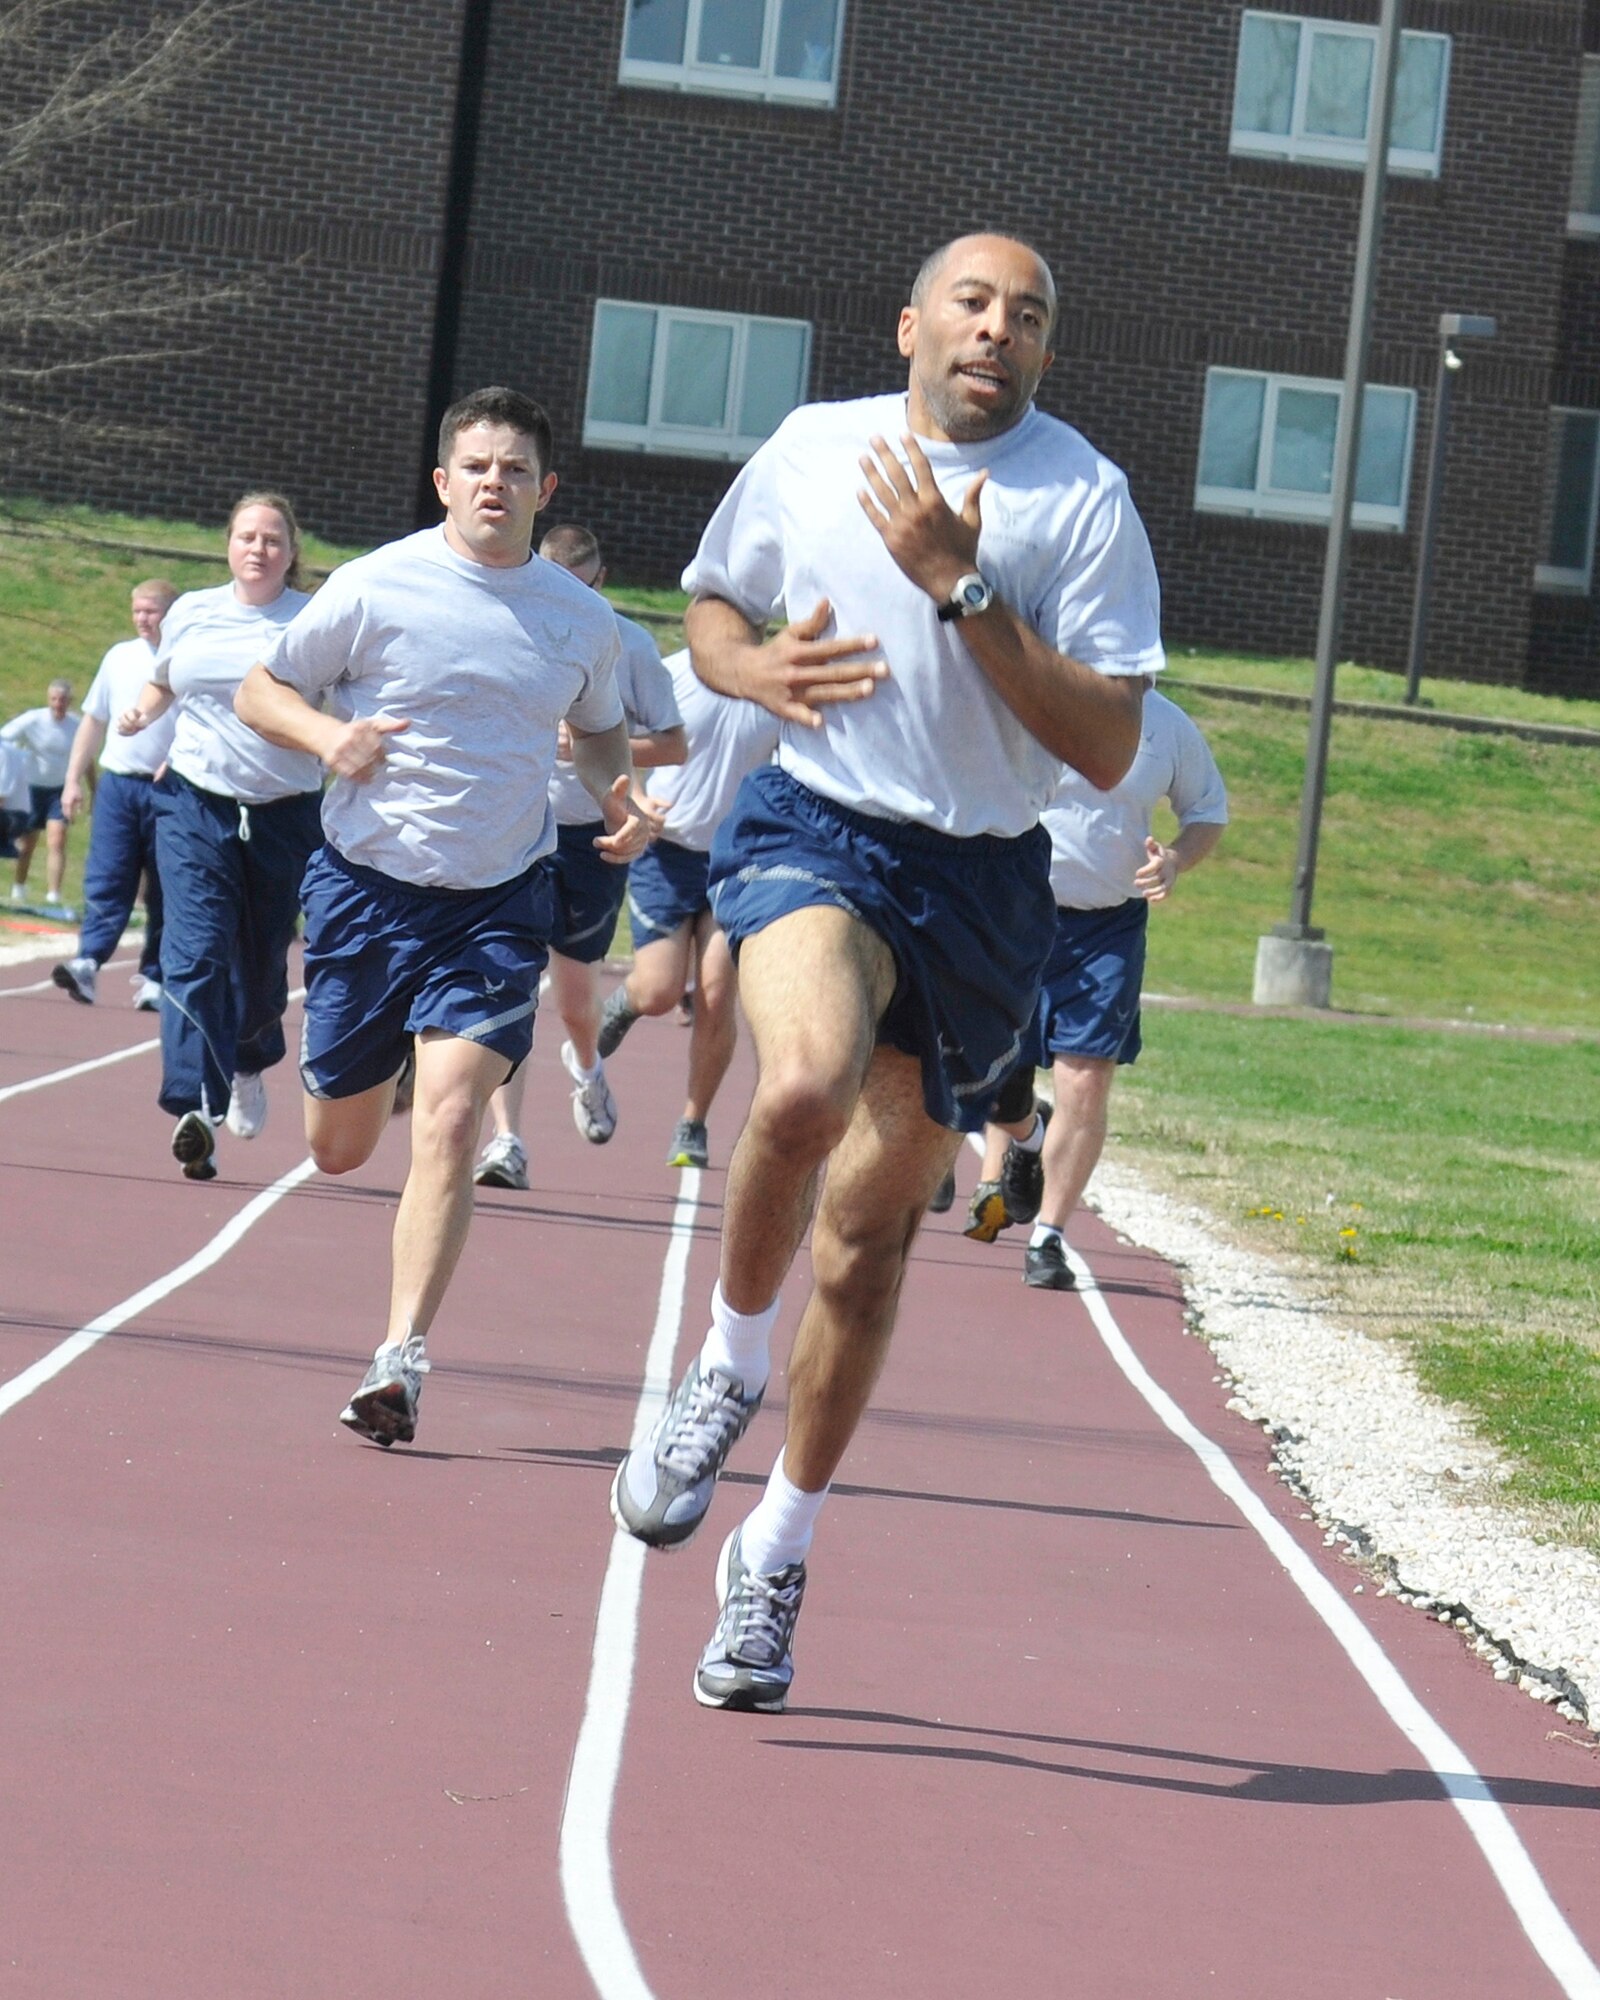 Airmen attending the The Paul H. Lankford Enlisted Professional Military Education Center's NCO Academy and Airman Leadership School at The I.G. Brown Training and Education Center perform physical training on the campus track, Mar. 15, 2012.  (National Guard photo by Master Sgt. Kurt Skoglund/Released)